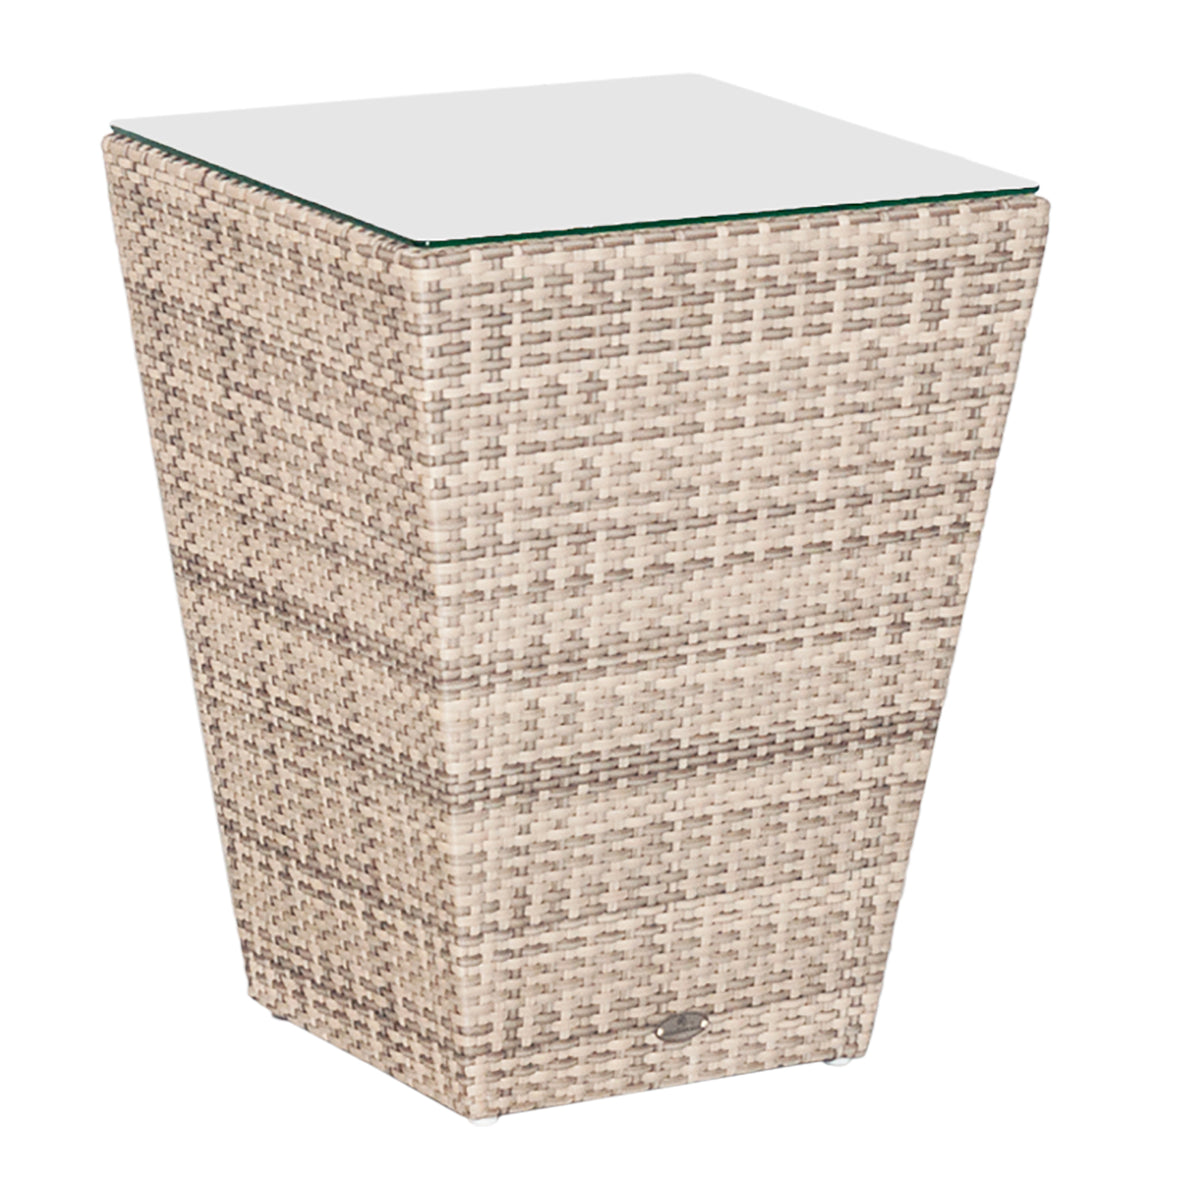 Alexander Rose Ocean Pearl Maldives Woven Side Table with Glass Top